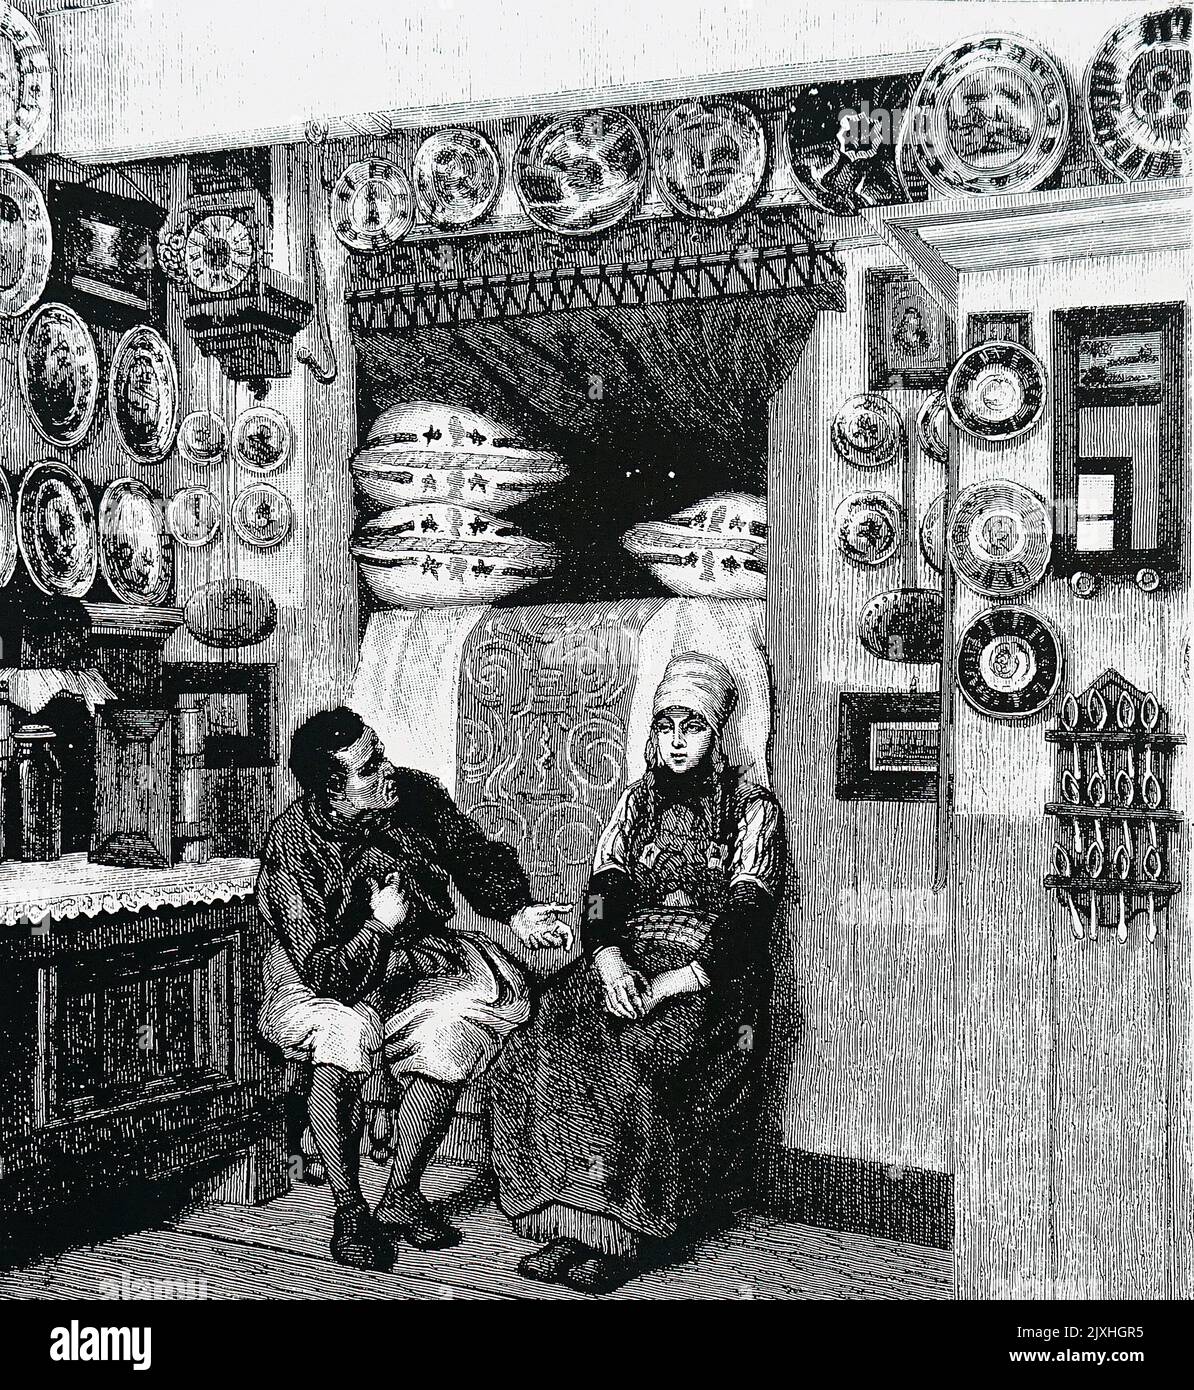 Illustration depicting the interior of a house on the Dutch island of Maaken, showing a cupboard bed behind the two figures. Dated 19th Century Stock Photo